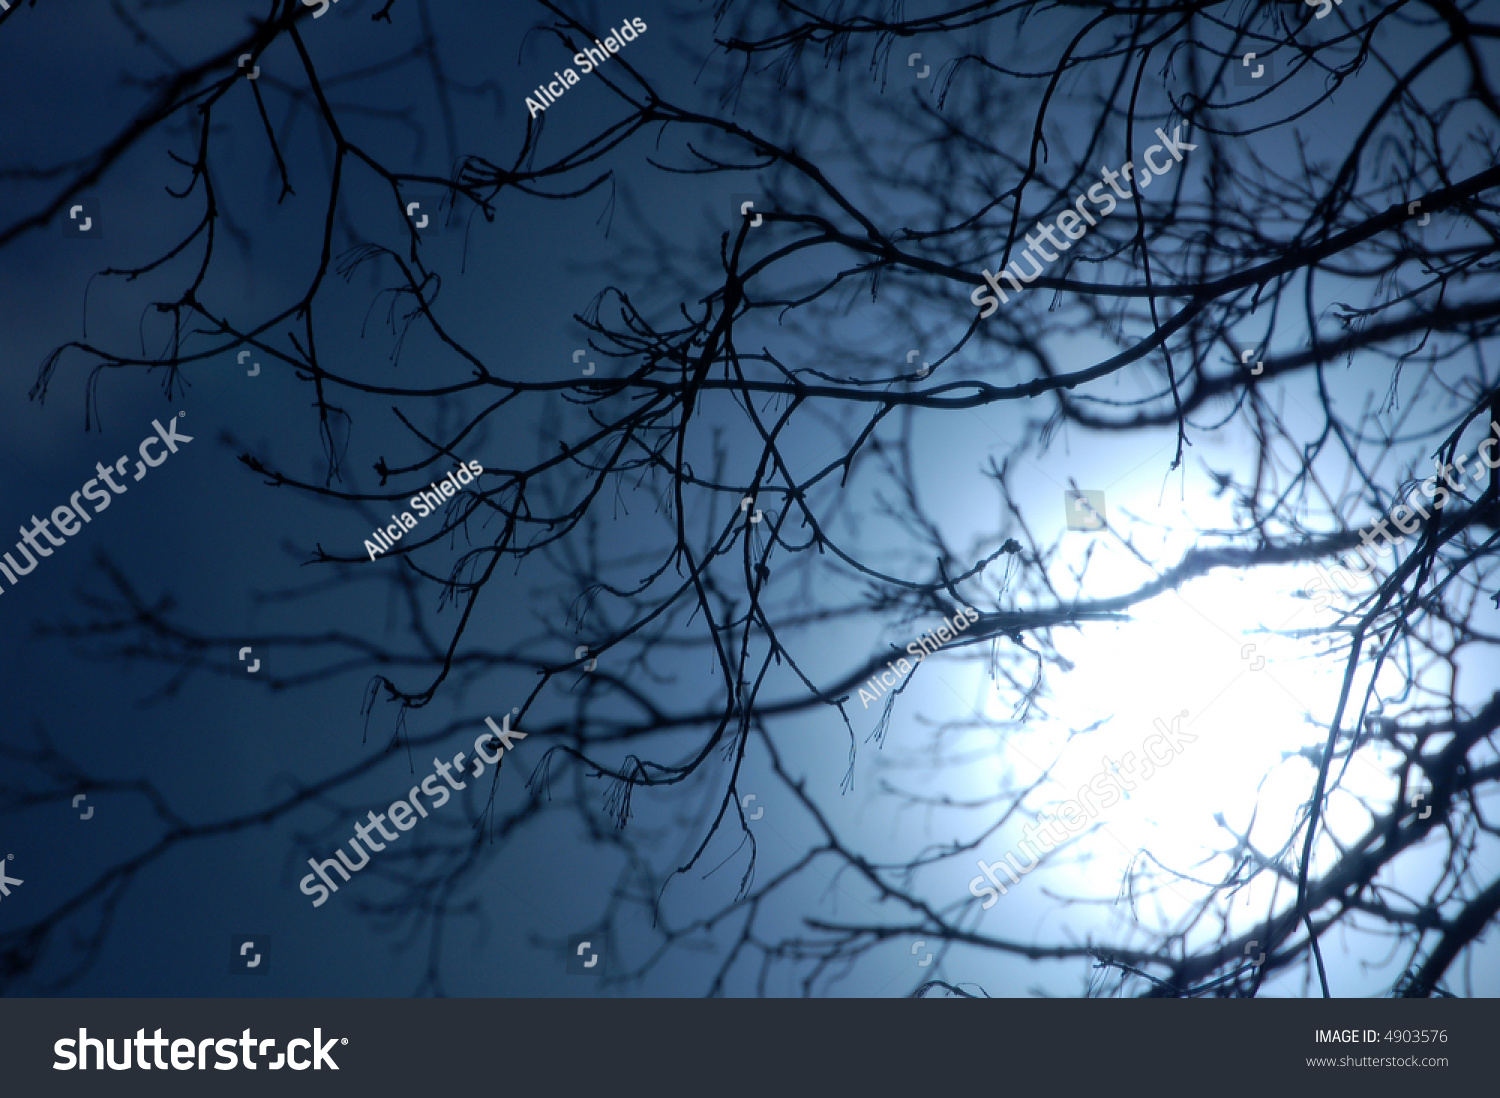 Silhouette Of Tree Branches Against Blue Moonlight. Stock Photo 4903576